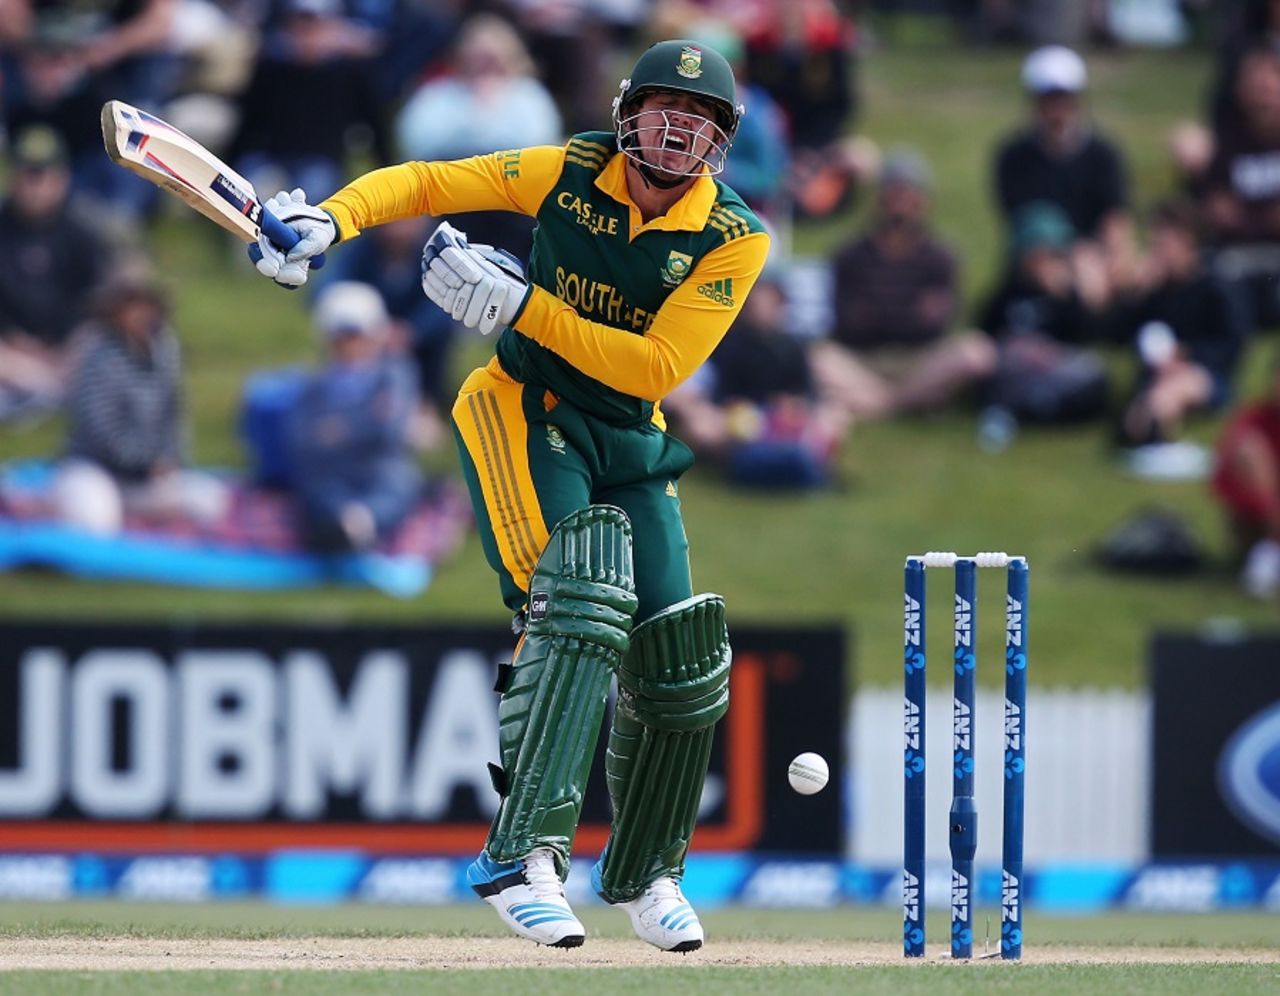 Quinton de Kock was struck on his left forearm, New Zealand v South Africa, 2nd ODI, Mount Maunganui, October 24, 2014